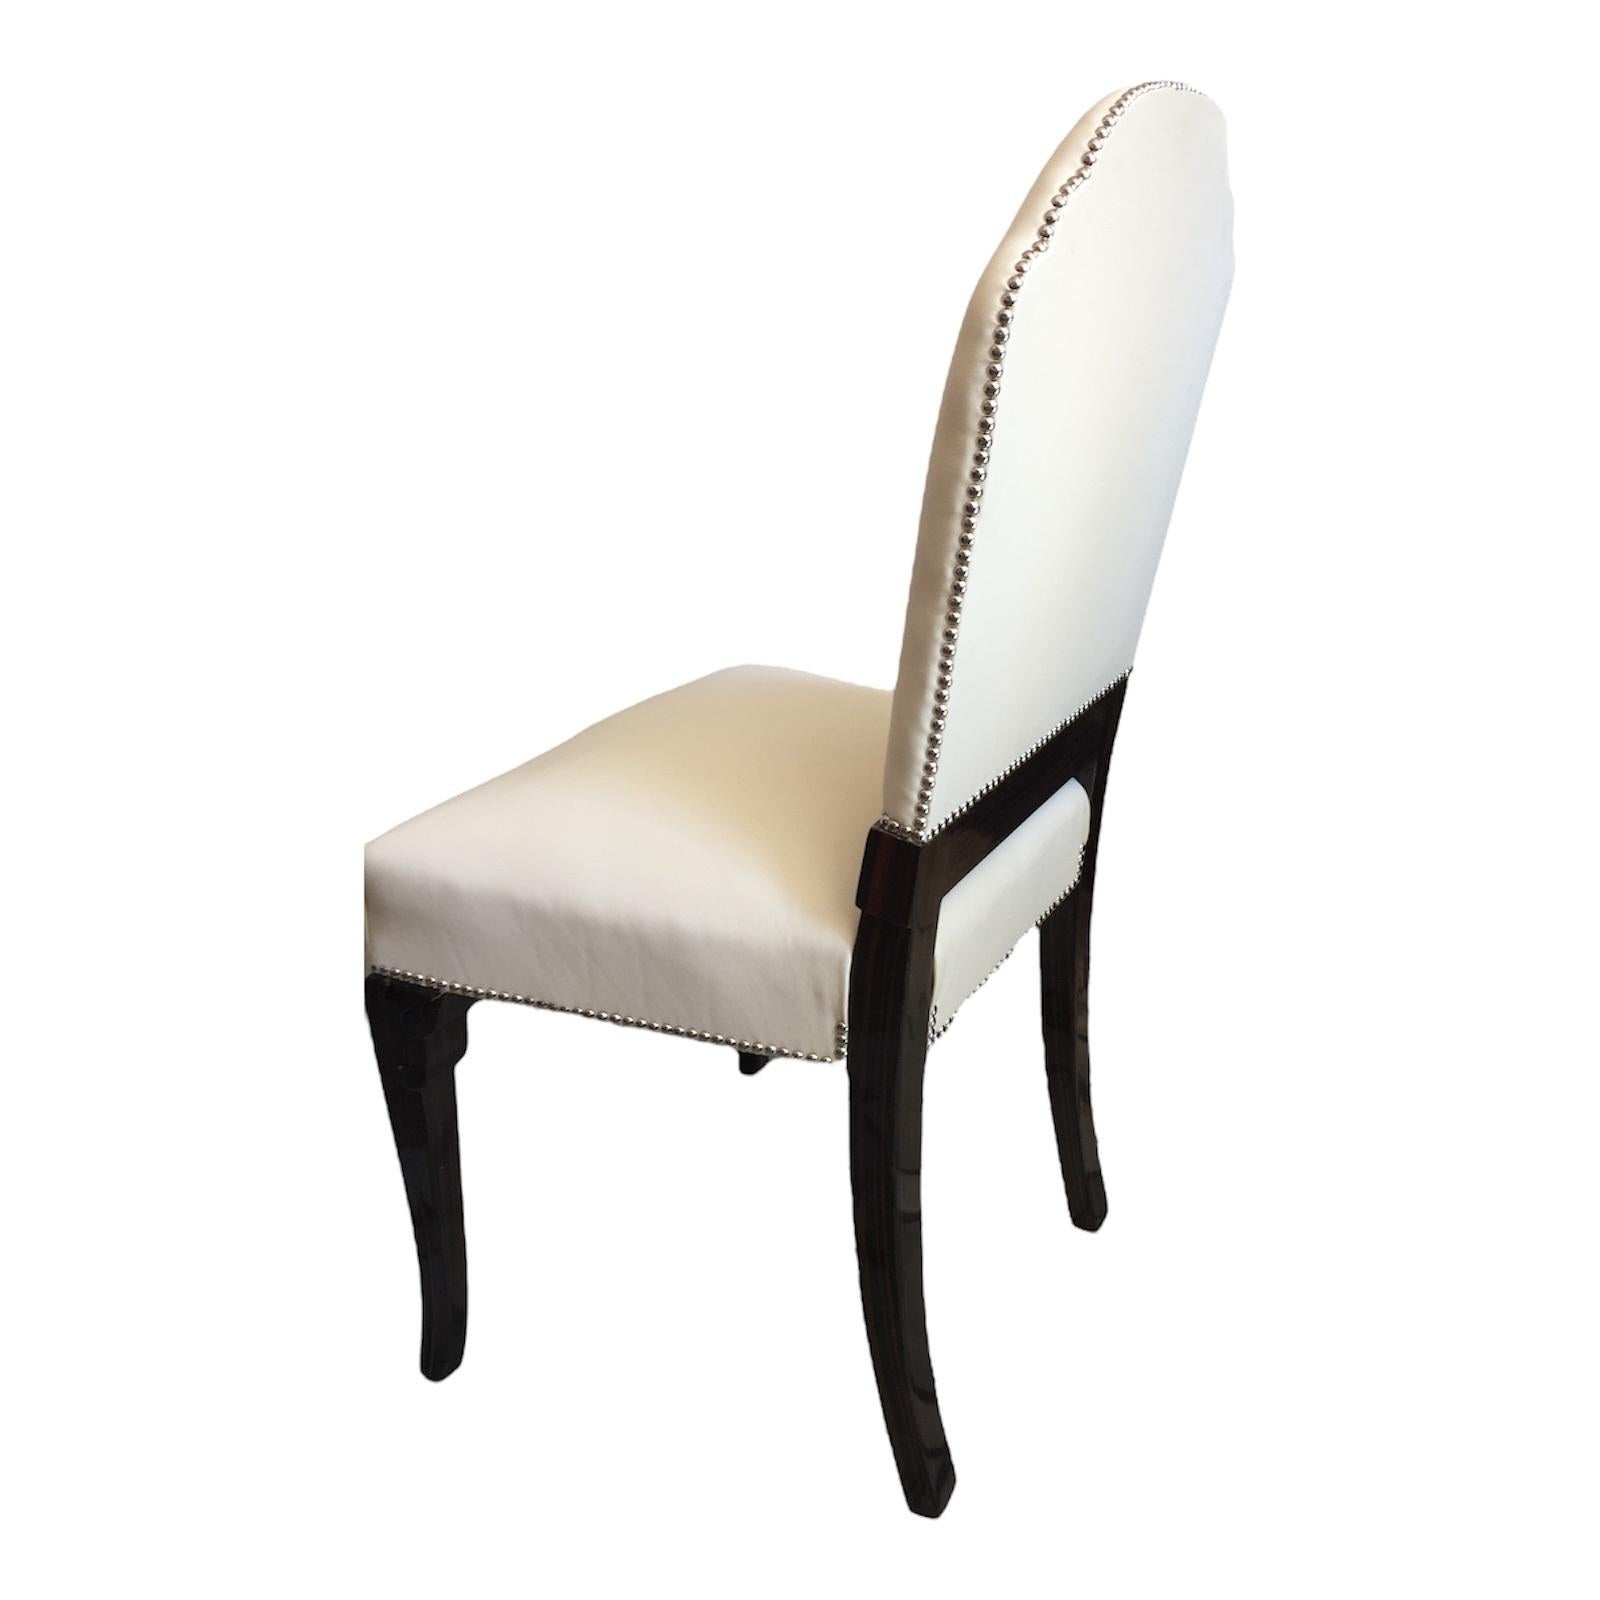 6 chairs in leather and wood.
Art Deco
The back of the chair forms the word Munich
Year 1900
Country: German
Materials : wood and leather
Elegant and sophisticated 6 chairs.
You want to live in the golden years, these are the chairs your project